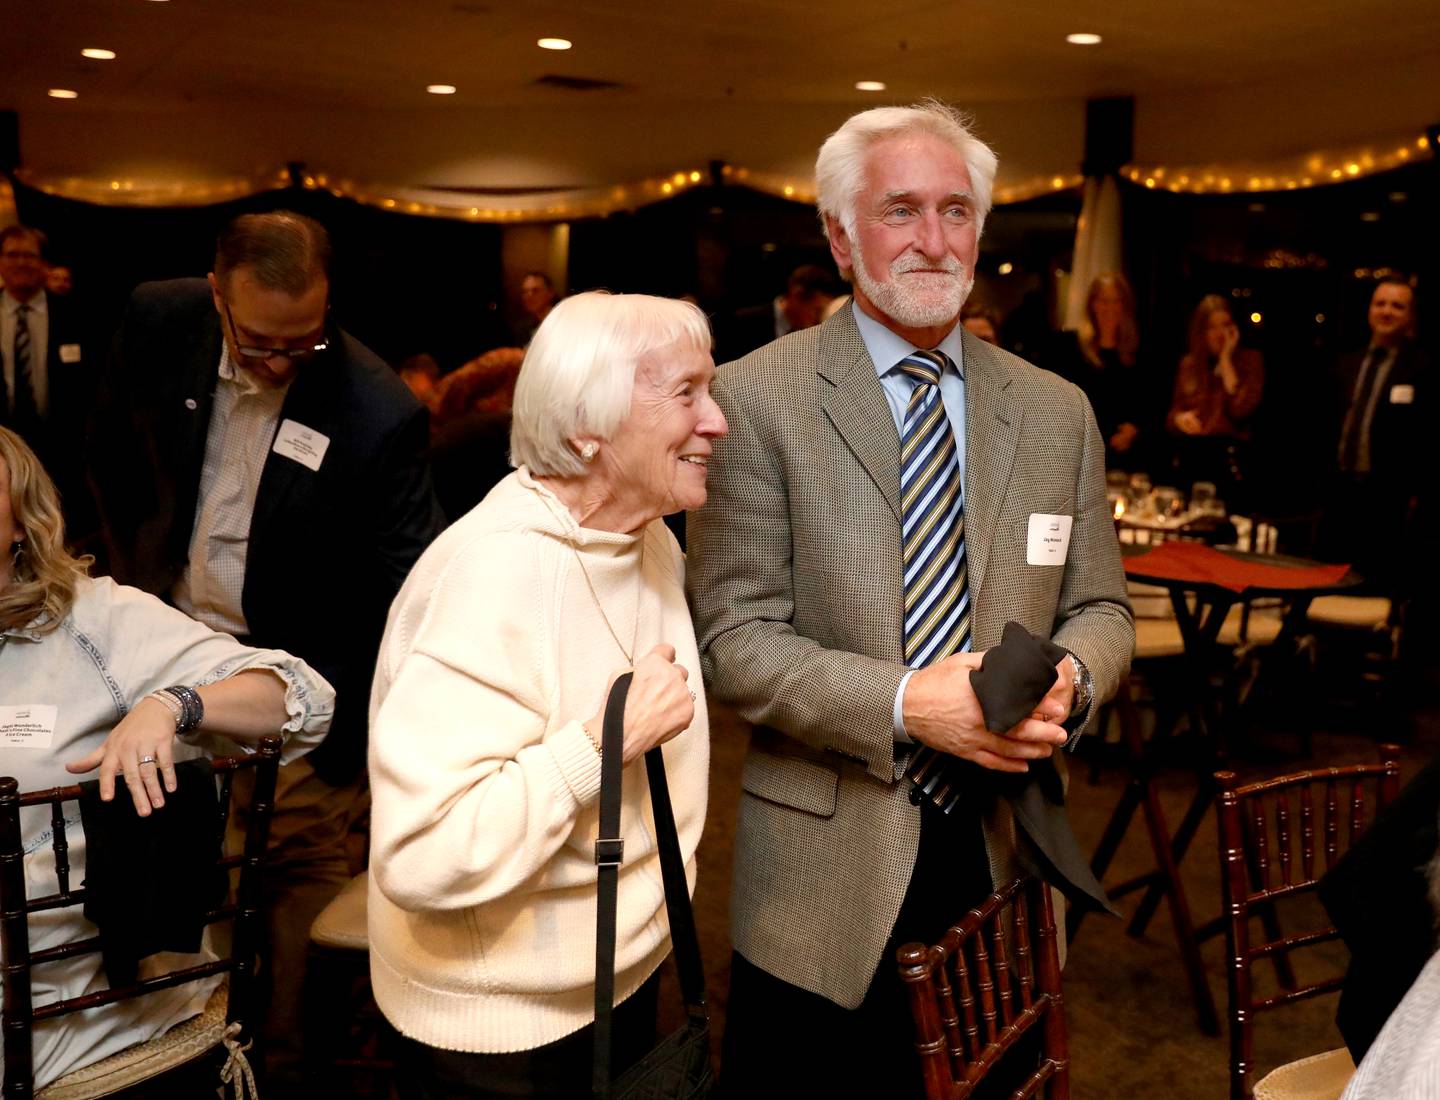 Jay Womack is joined by his mom, Donna, after he was named the 2022 Wood Award winner by the Geneva Chamber of Commerce during the chamber’s annual dinner and awards at Riverside Receptions in Geneva on Wednesday, Nov. 16, 2022.